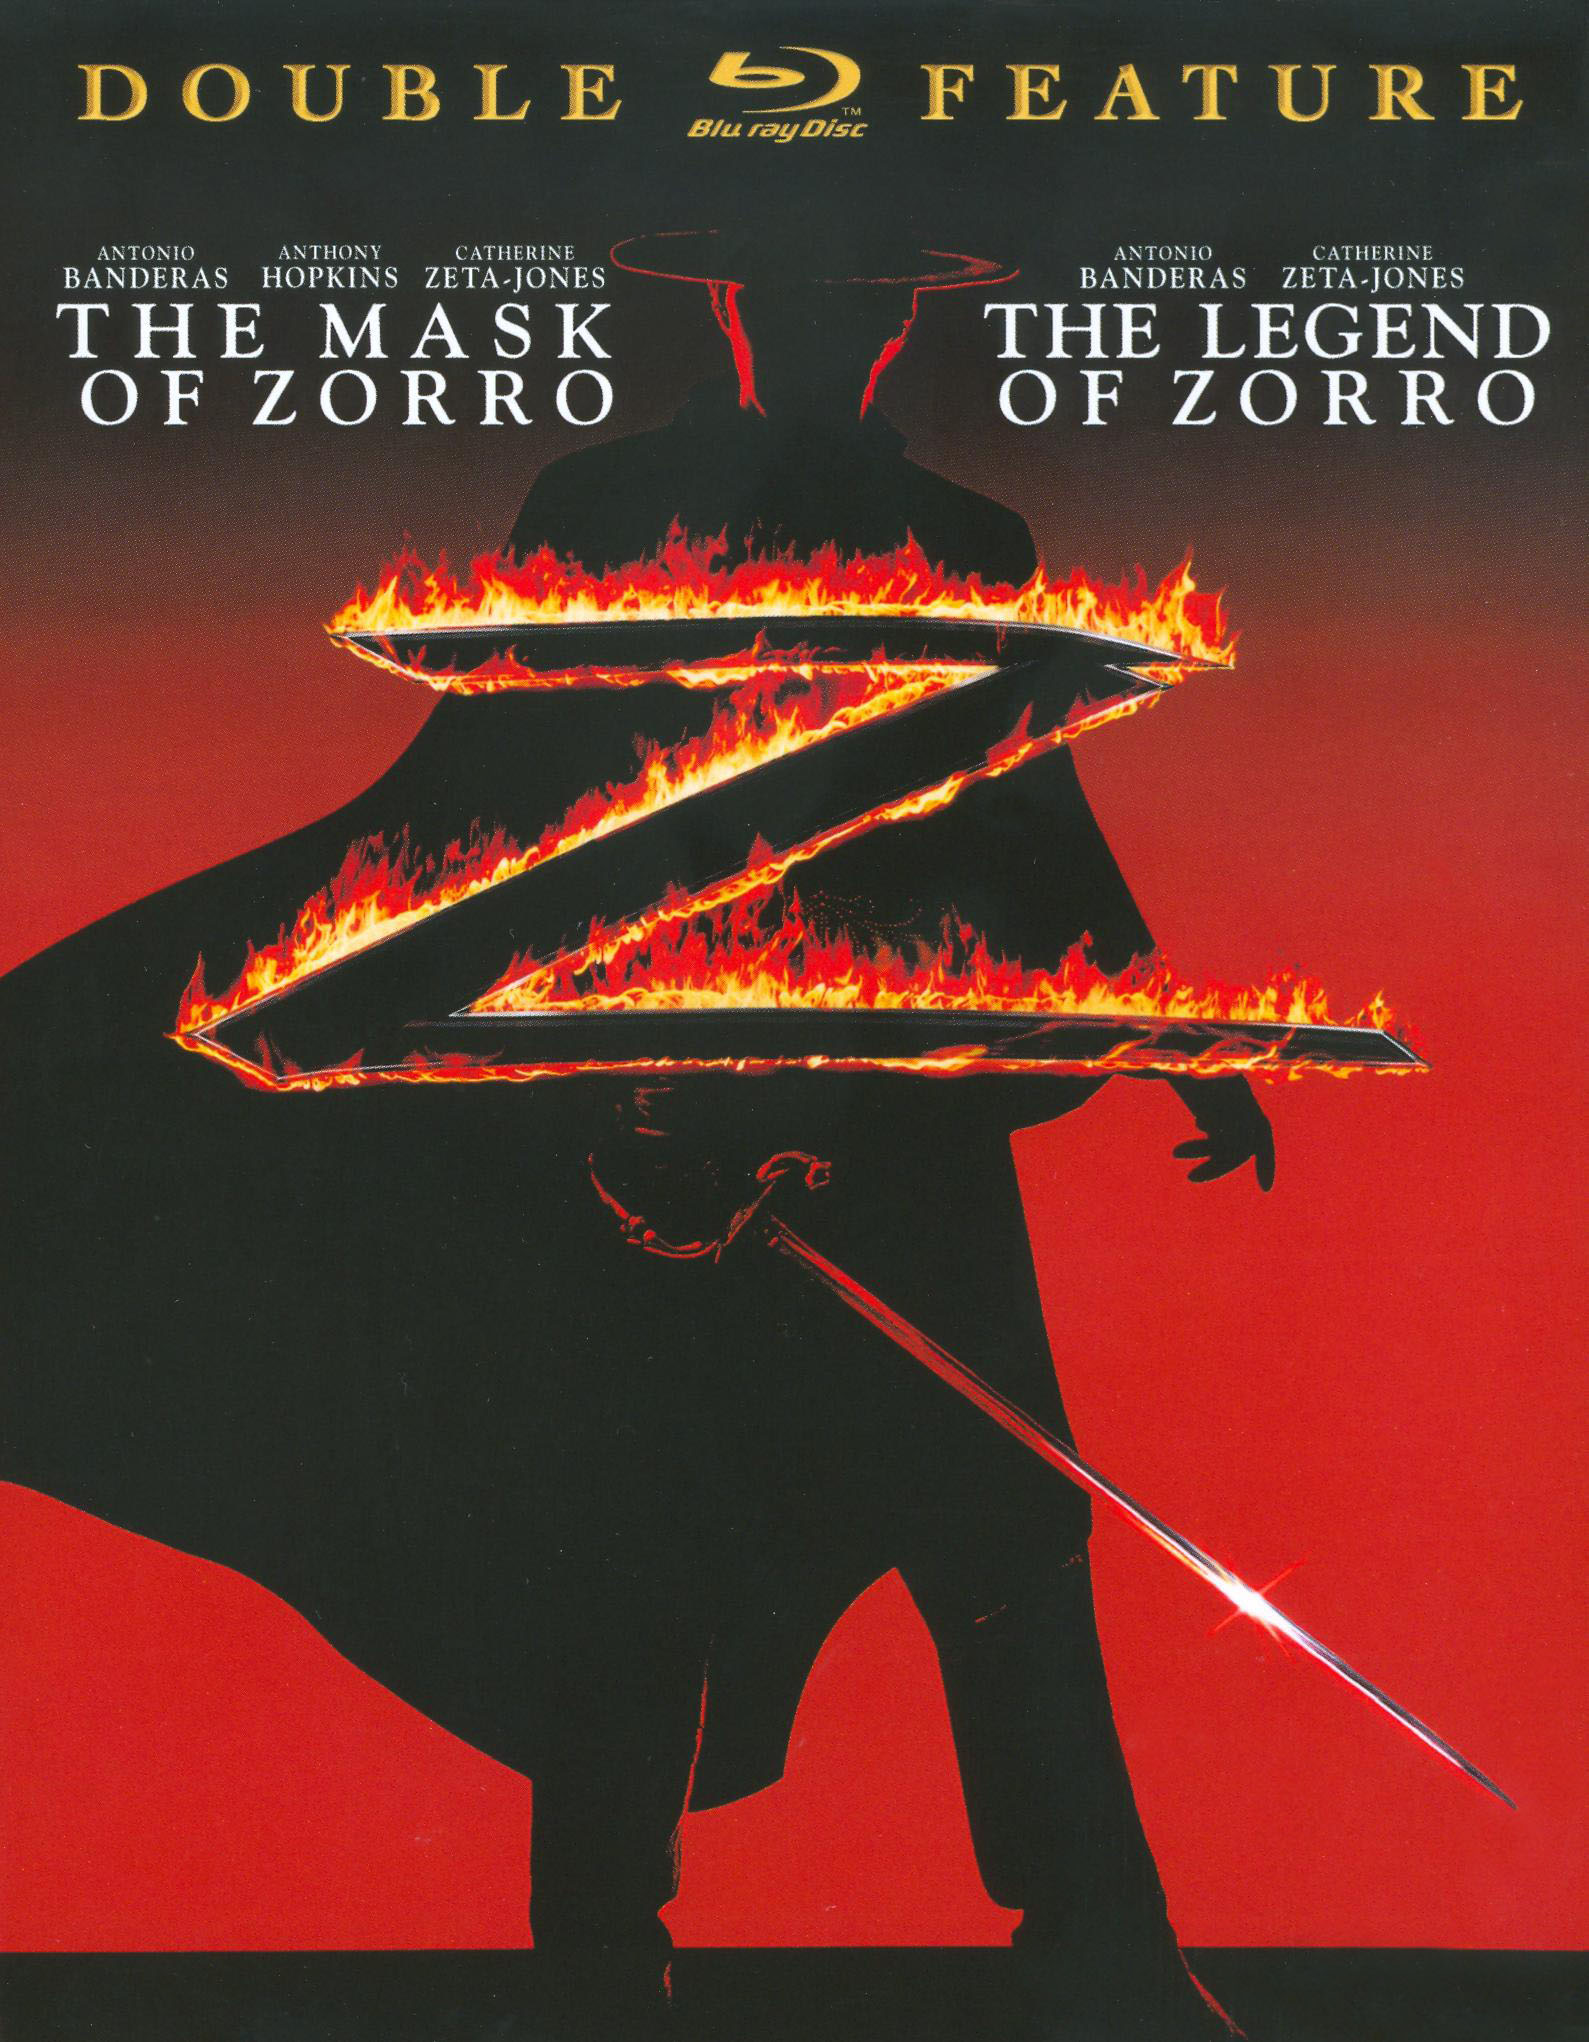 MASK OF ZORRO, THE: EXPANDED & REMASTERED LIMITED EDITION (2-CD SET)